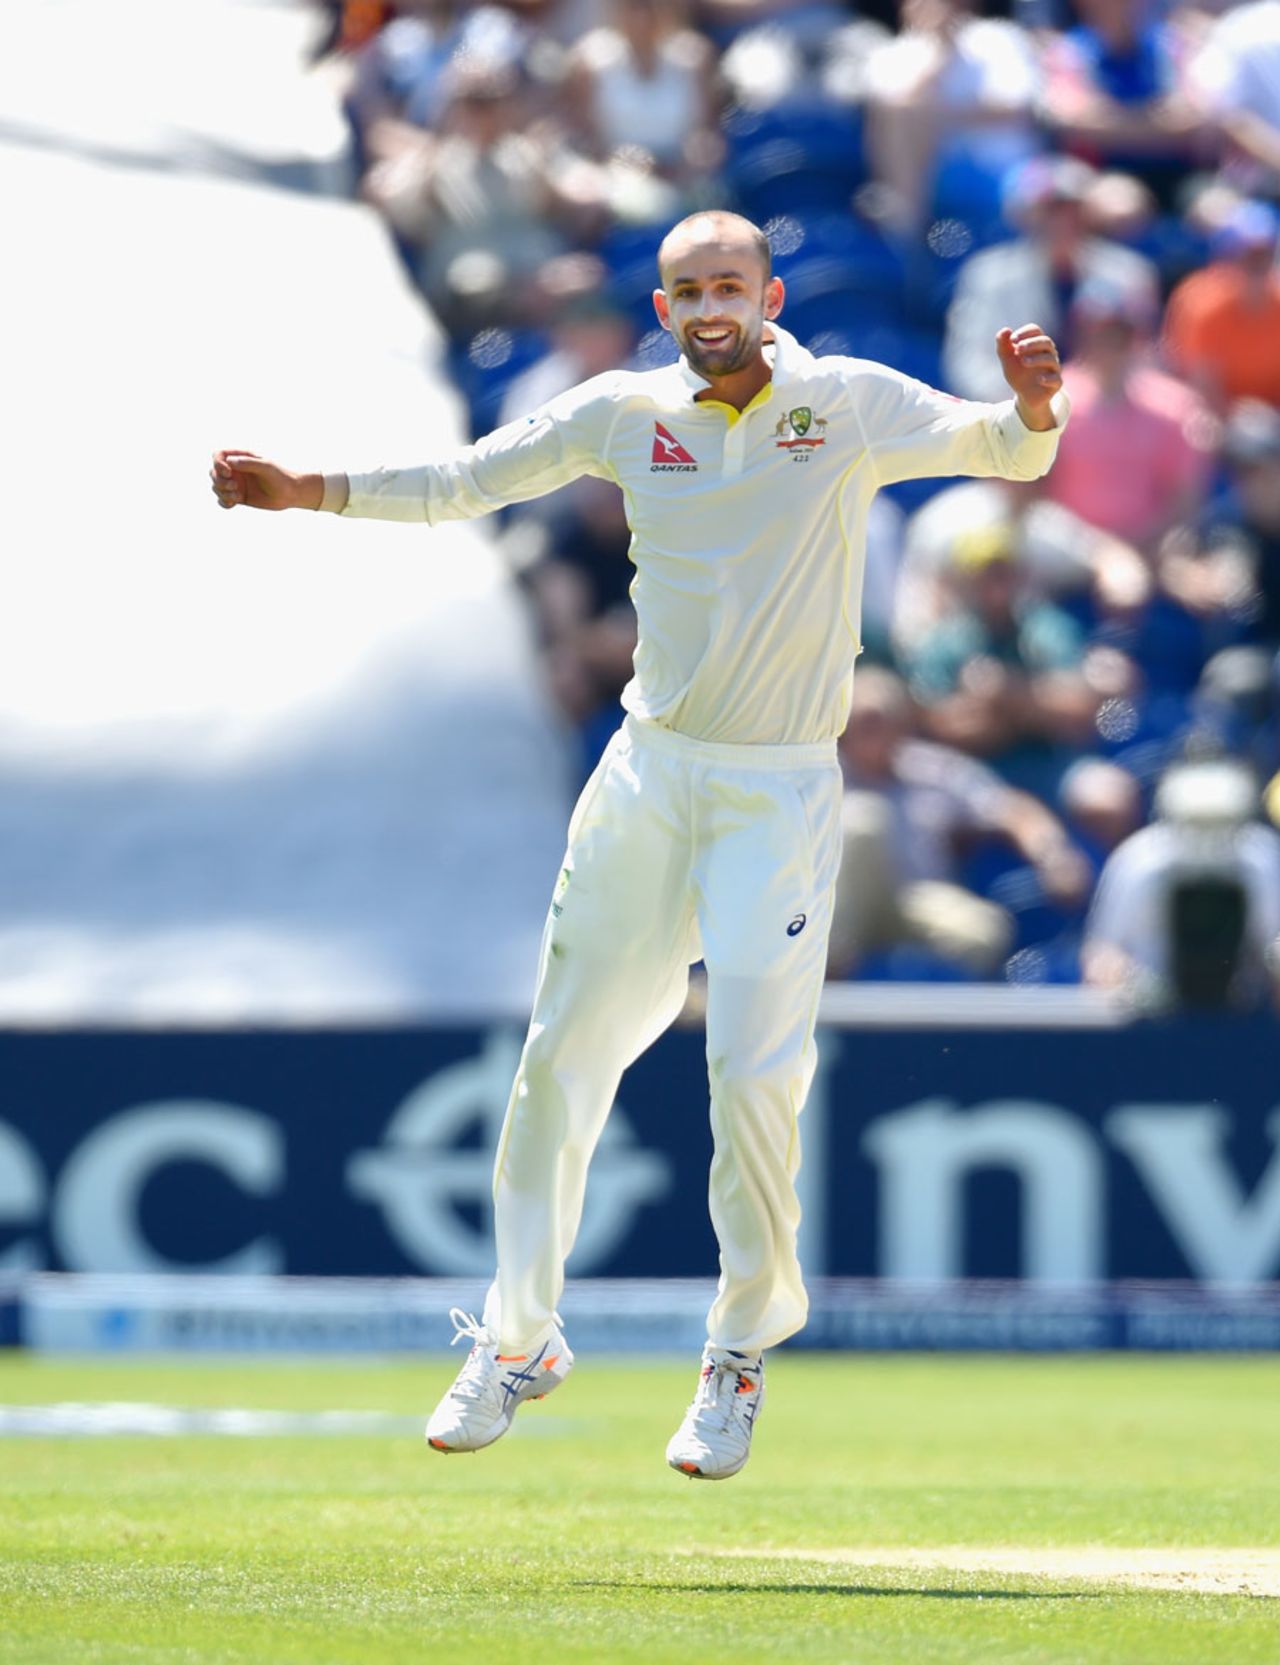 Nathan Lyon jumps for joy as Michael Clarke takes a spectacular catch to dismiss Adam Lyth, England v Australia, 1st Investec Ashes Test, Cardiff, 3rd day, July 10, 2015